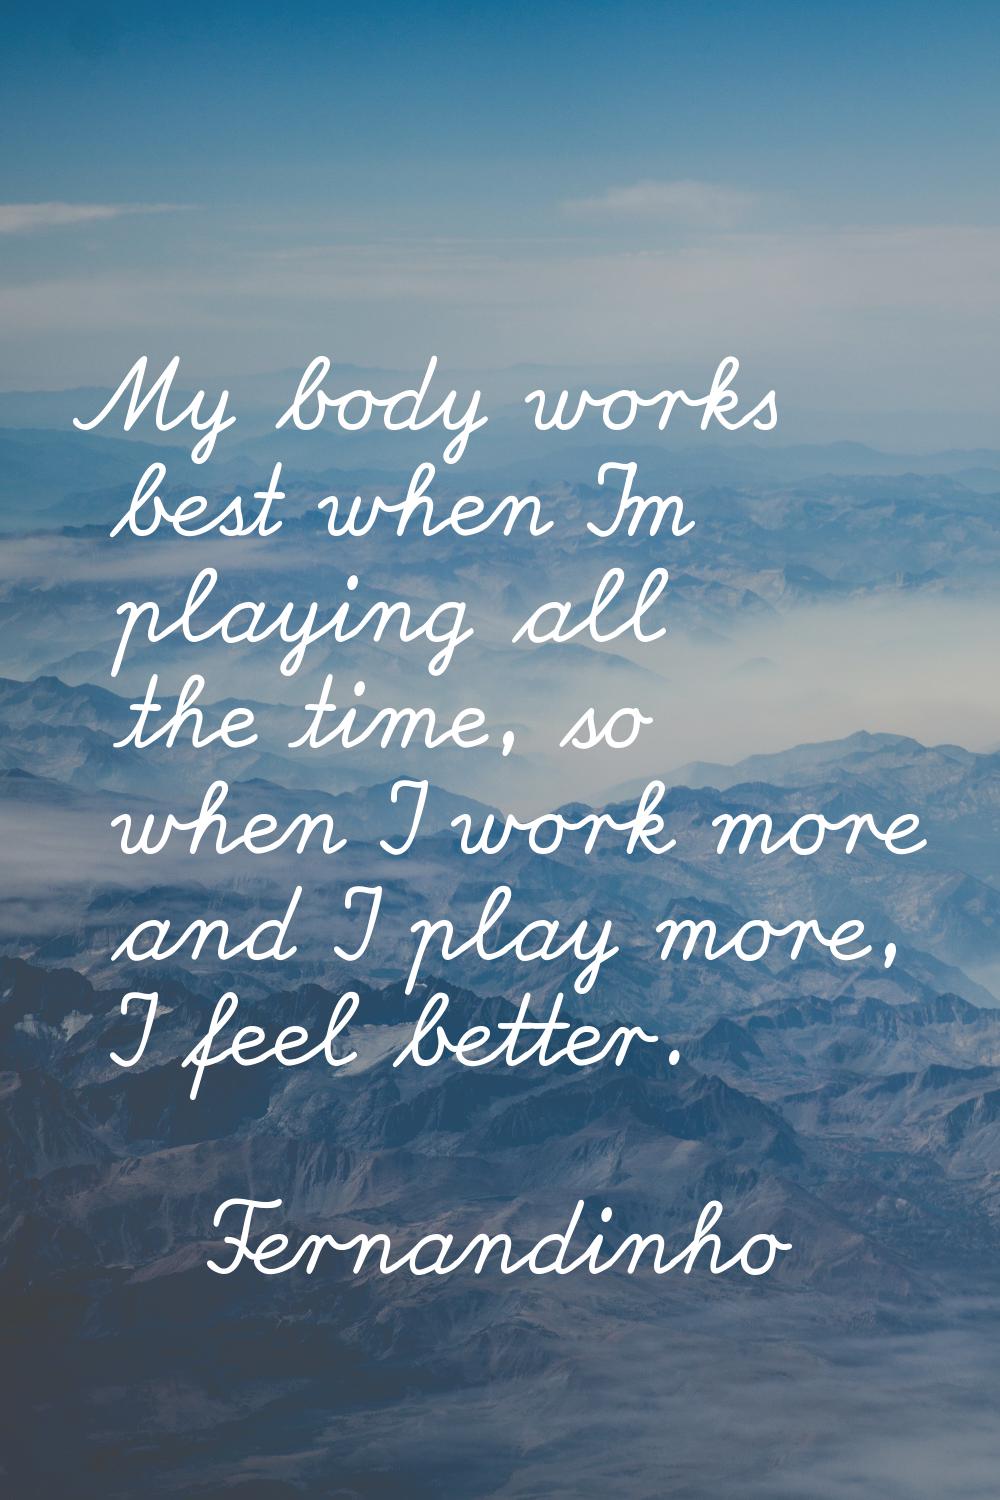 My body works best when I'm playing all the time, so when I work more and I play more, I feel bette